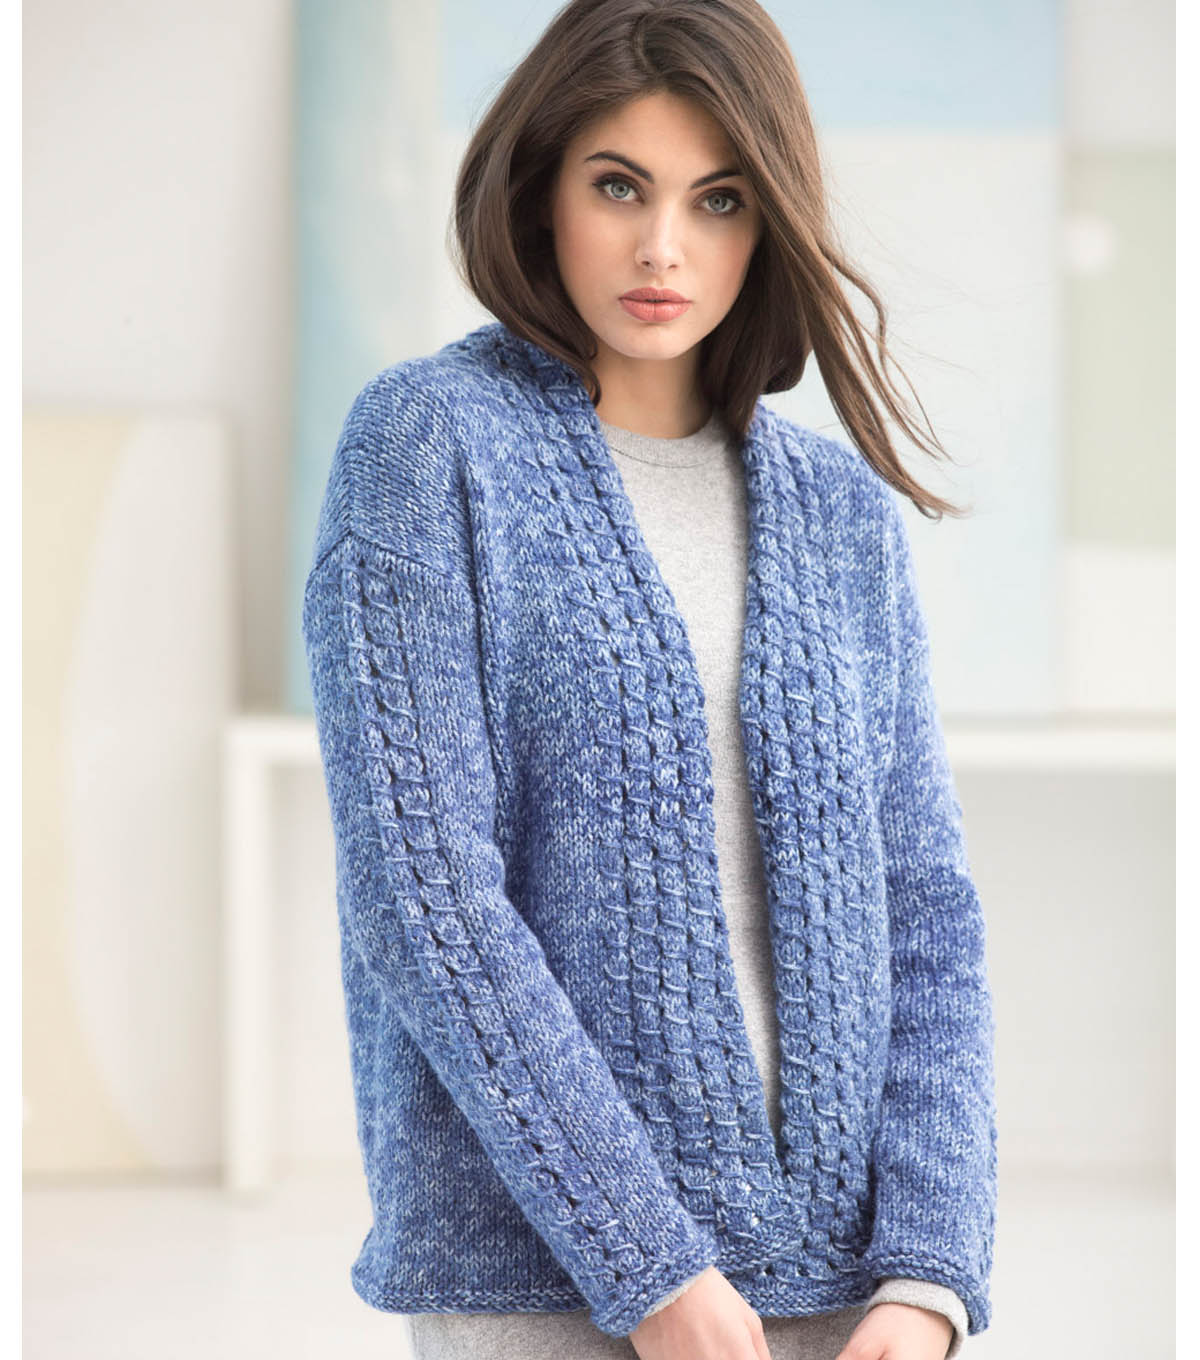 How to Knit A Lille Cardigan | JOANN